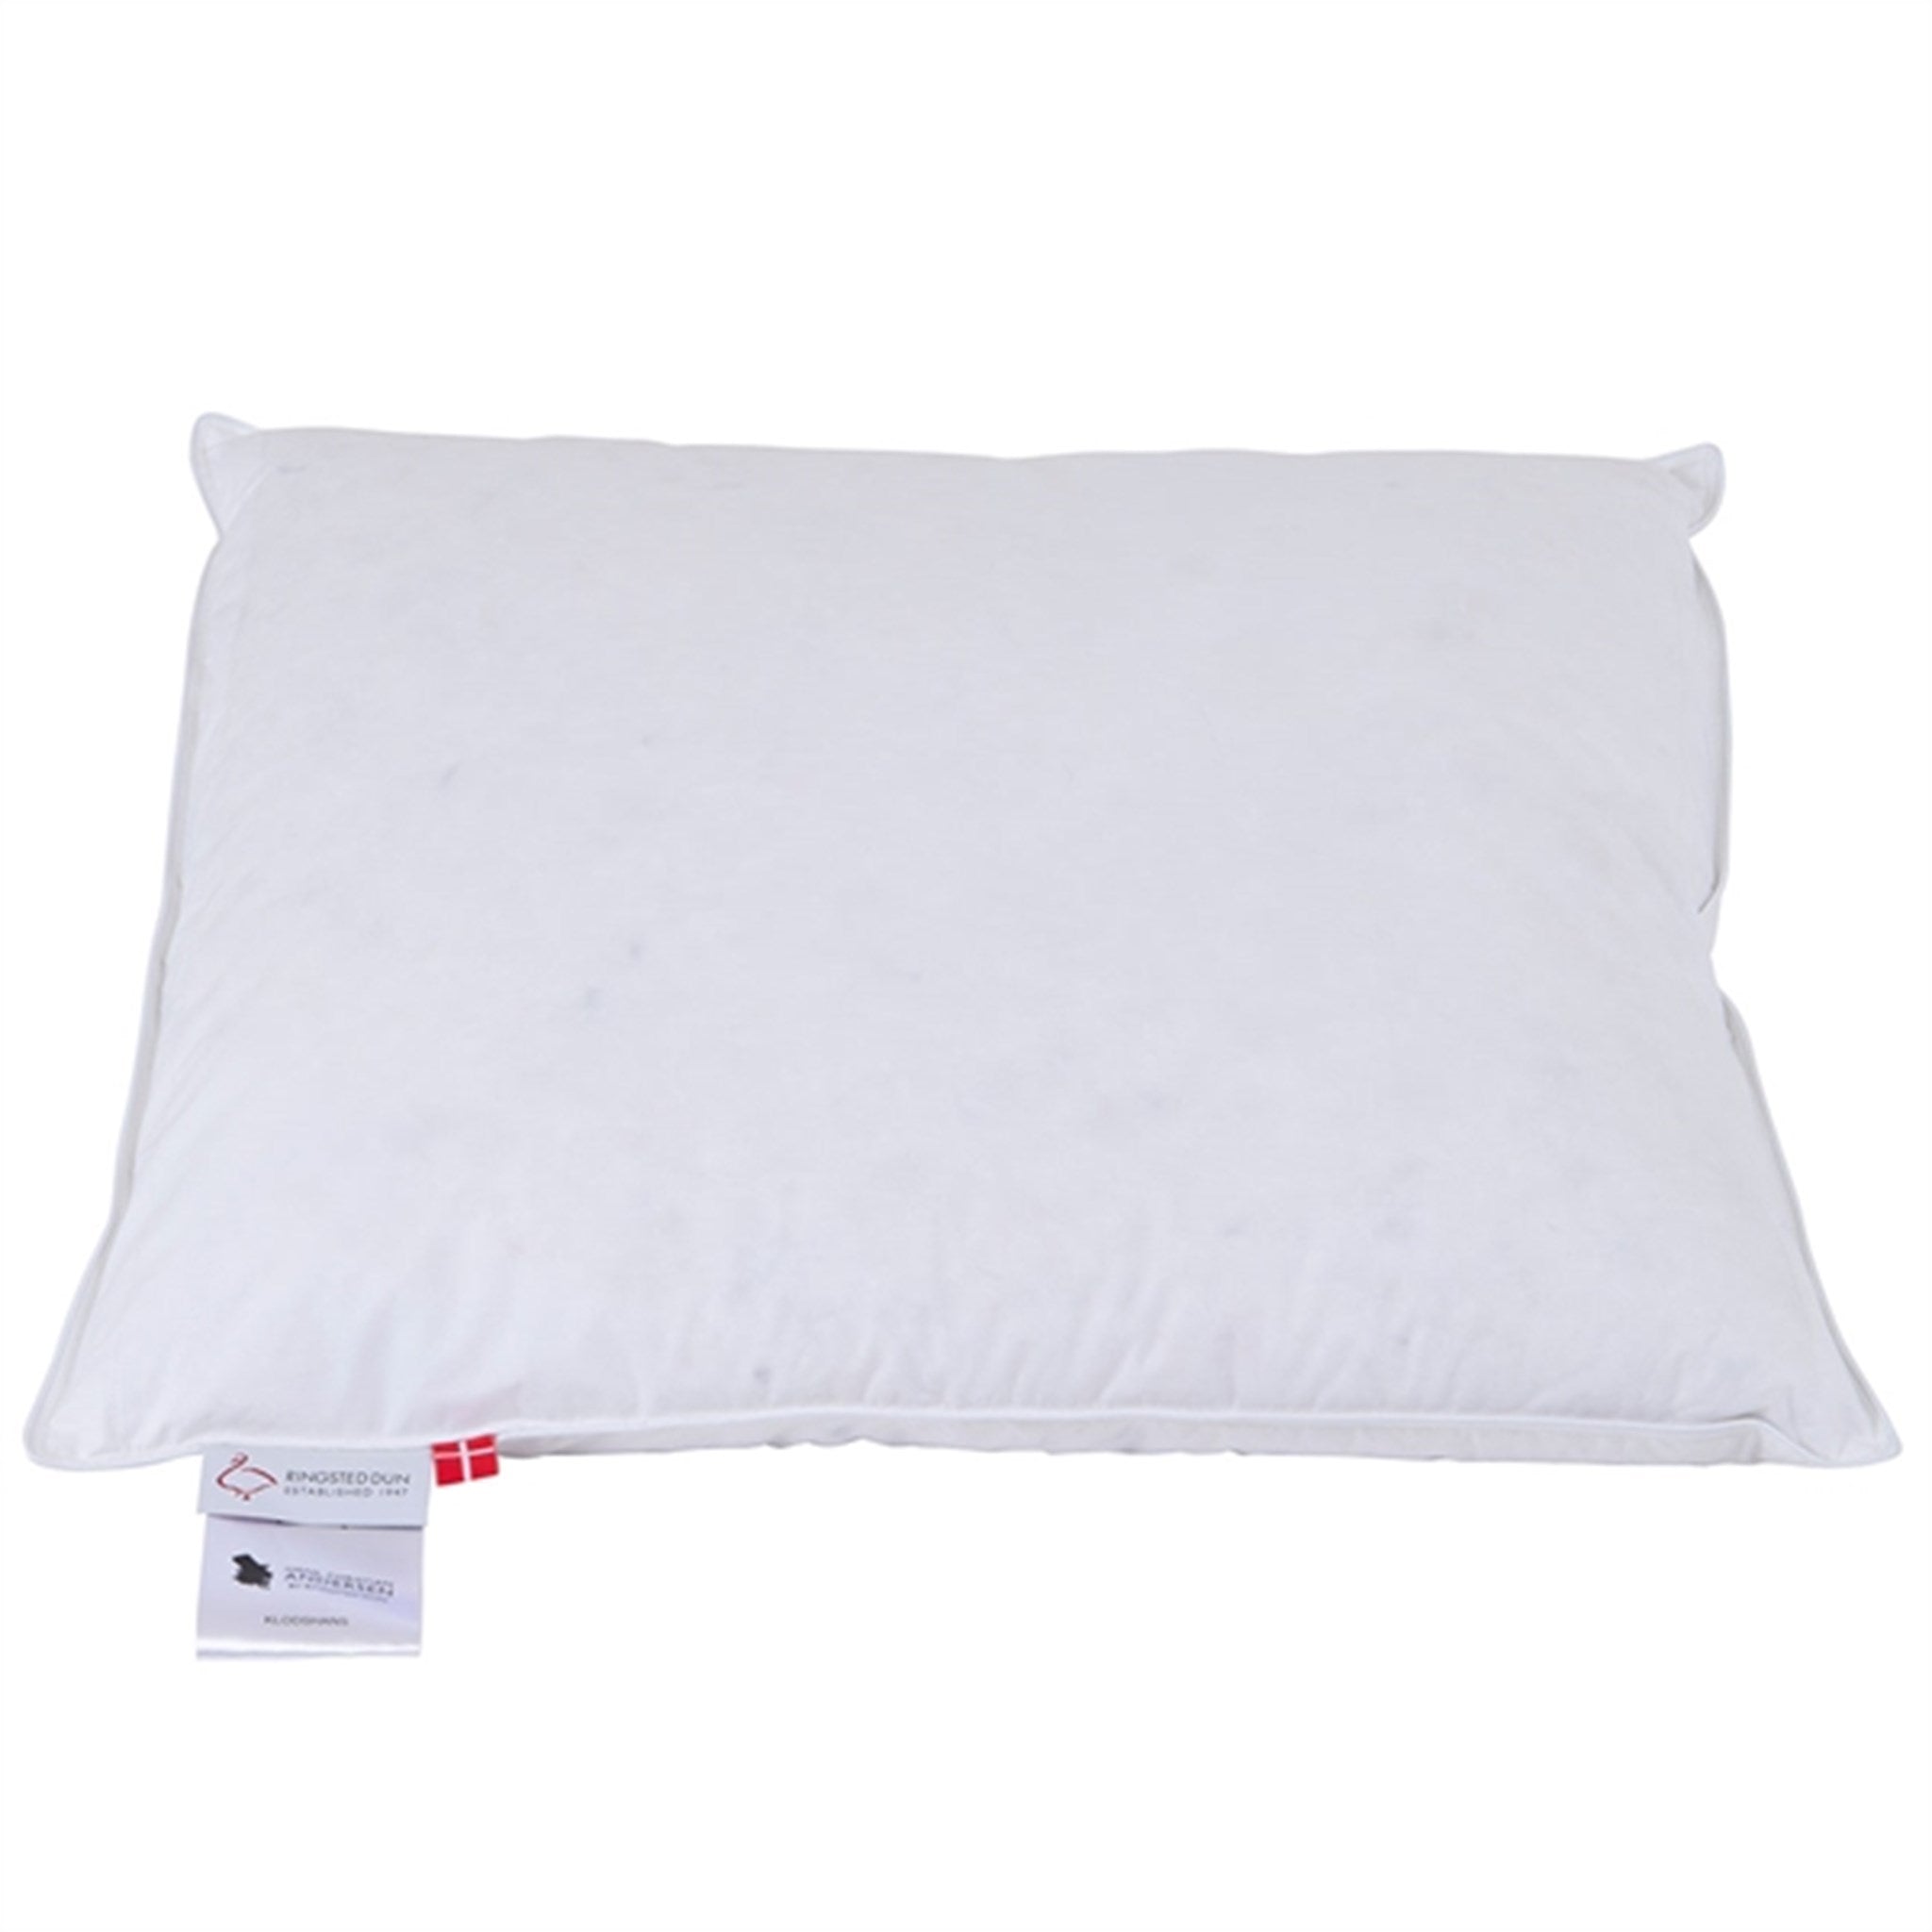 RINGSTED DUN Klodshans Adult Pillow Extra low